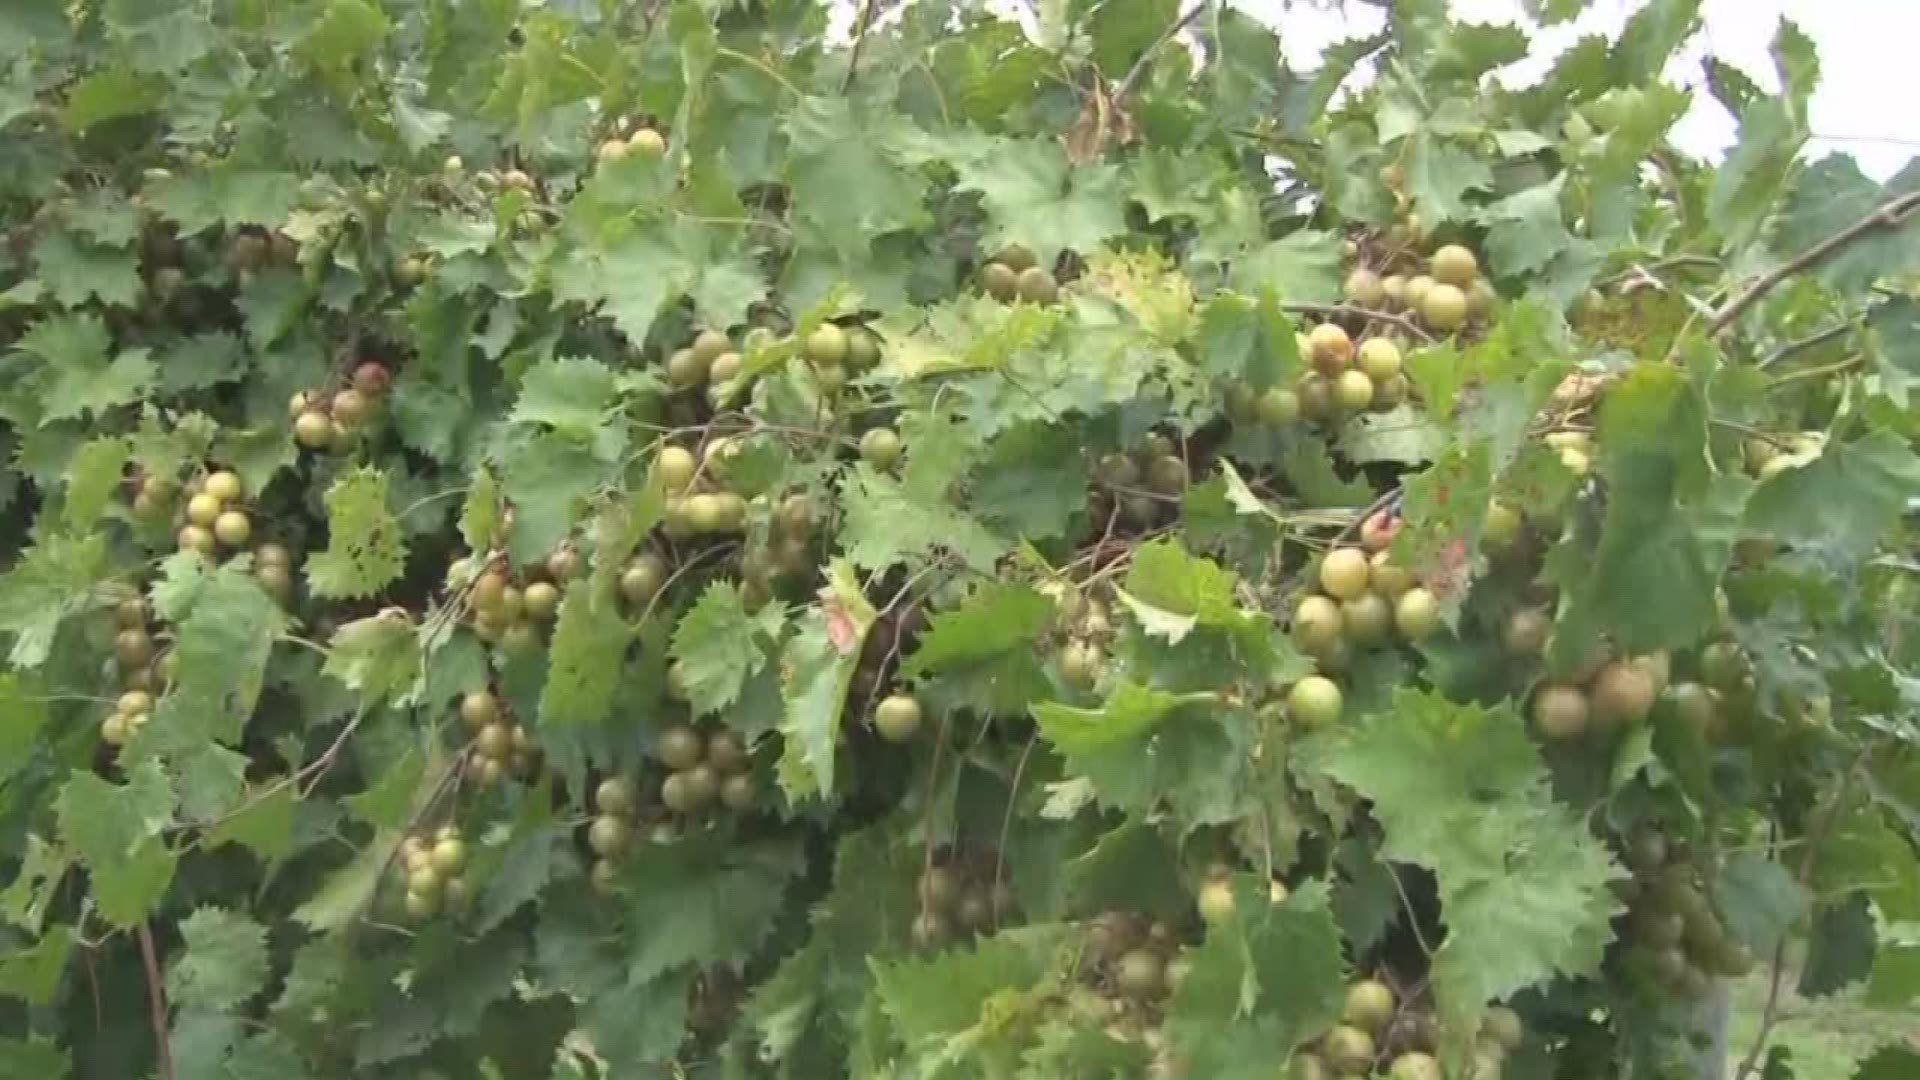 Vineyard owners scramble to save harvest from potential damage from Irma. Too much rain can dilute the sweetness of the grapes. Too much wind could knock over the vines.